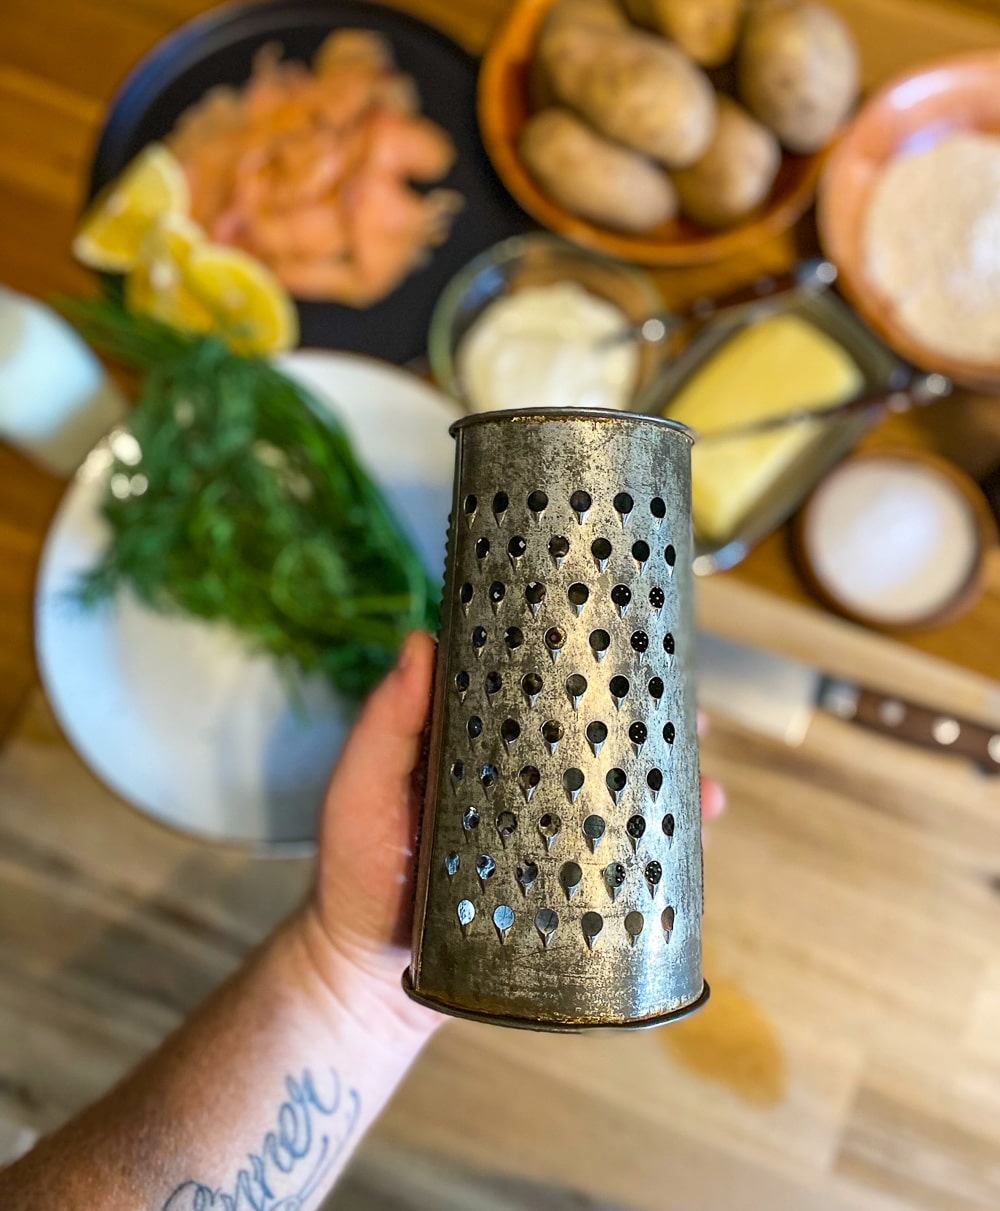 Chef Mark's well used grater.